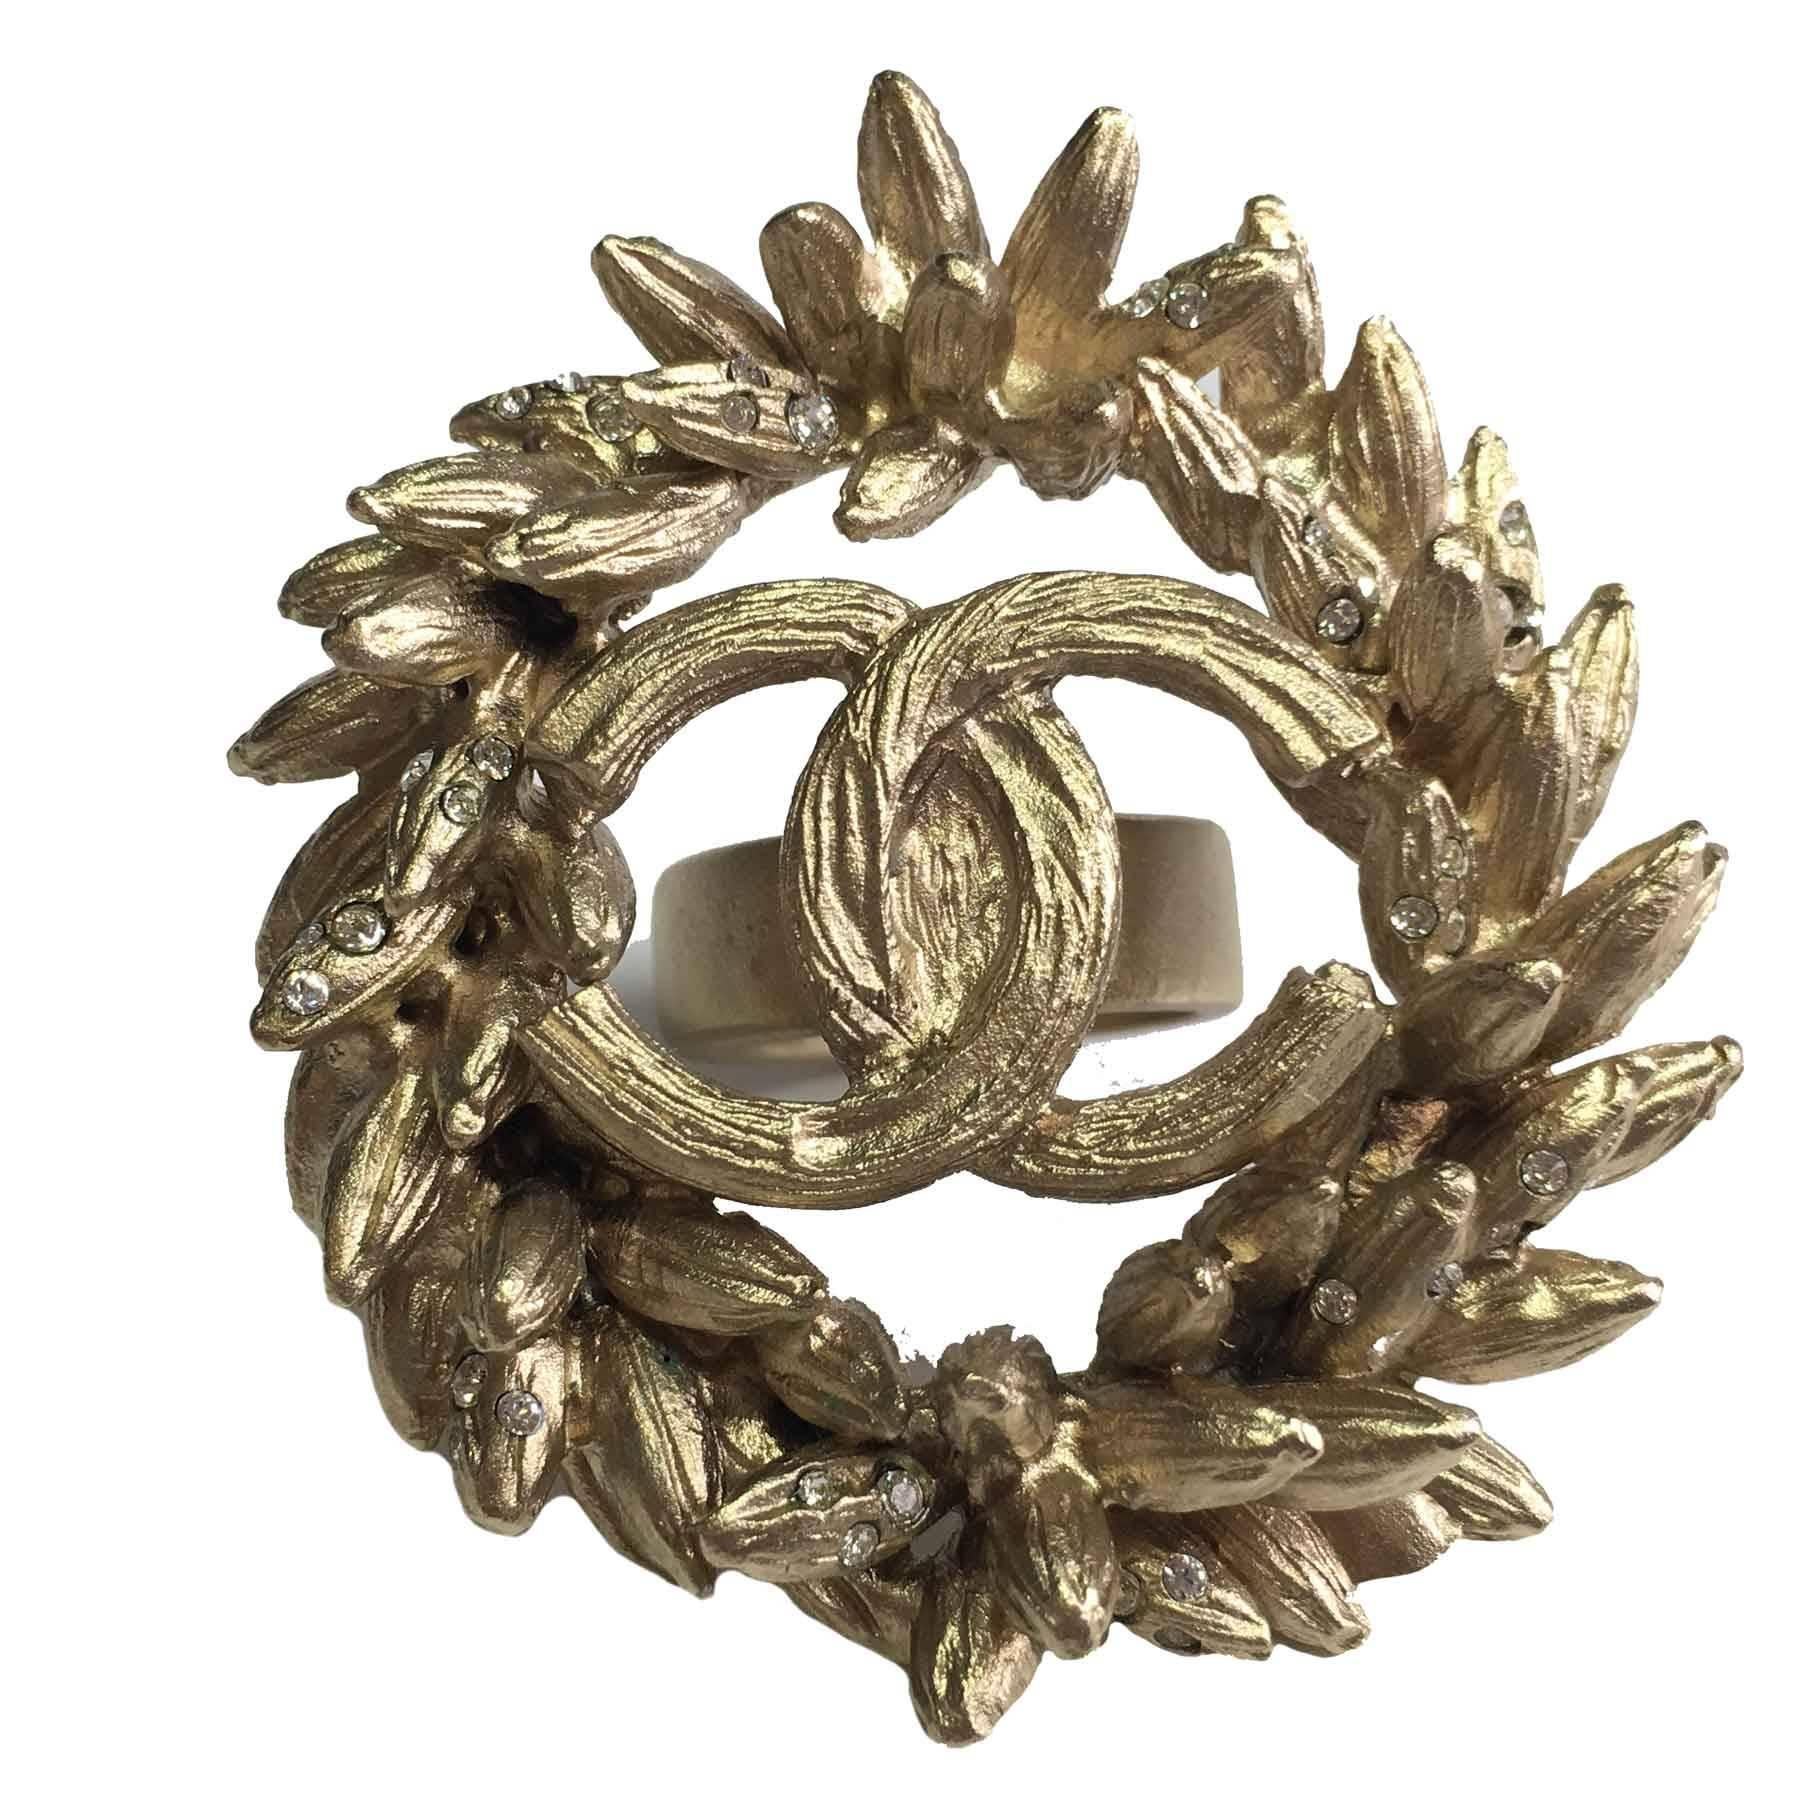 CHANEL Crown Ear of Wheat Ring in Gilded Metal Size 53FR 3